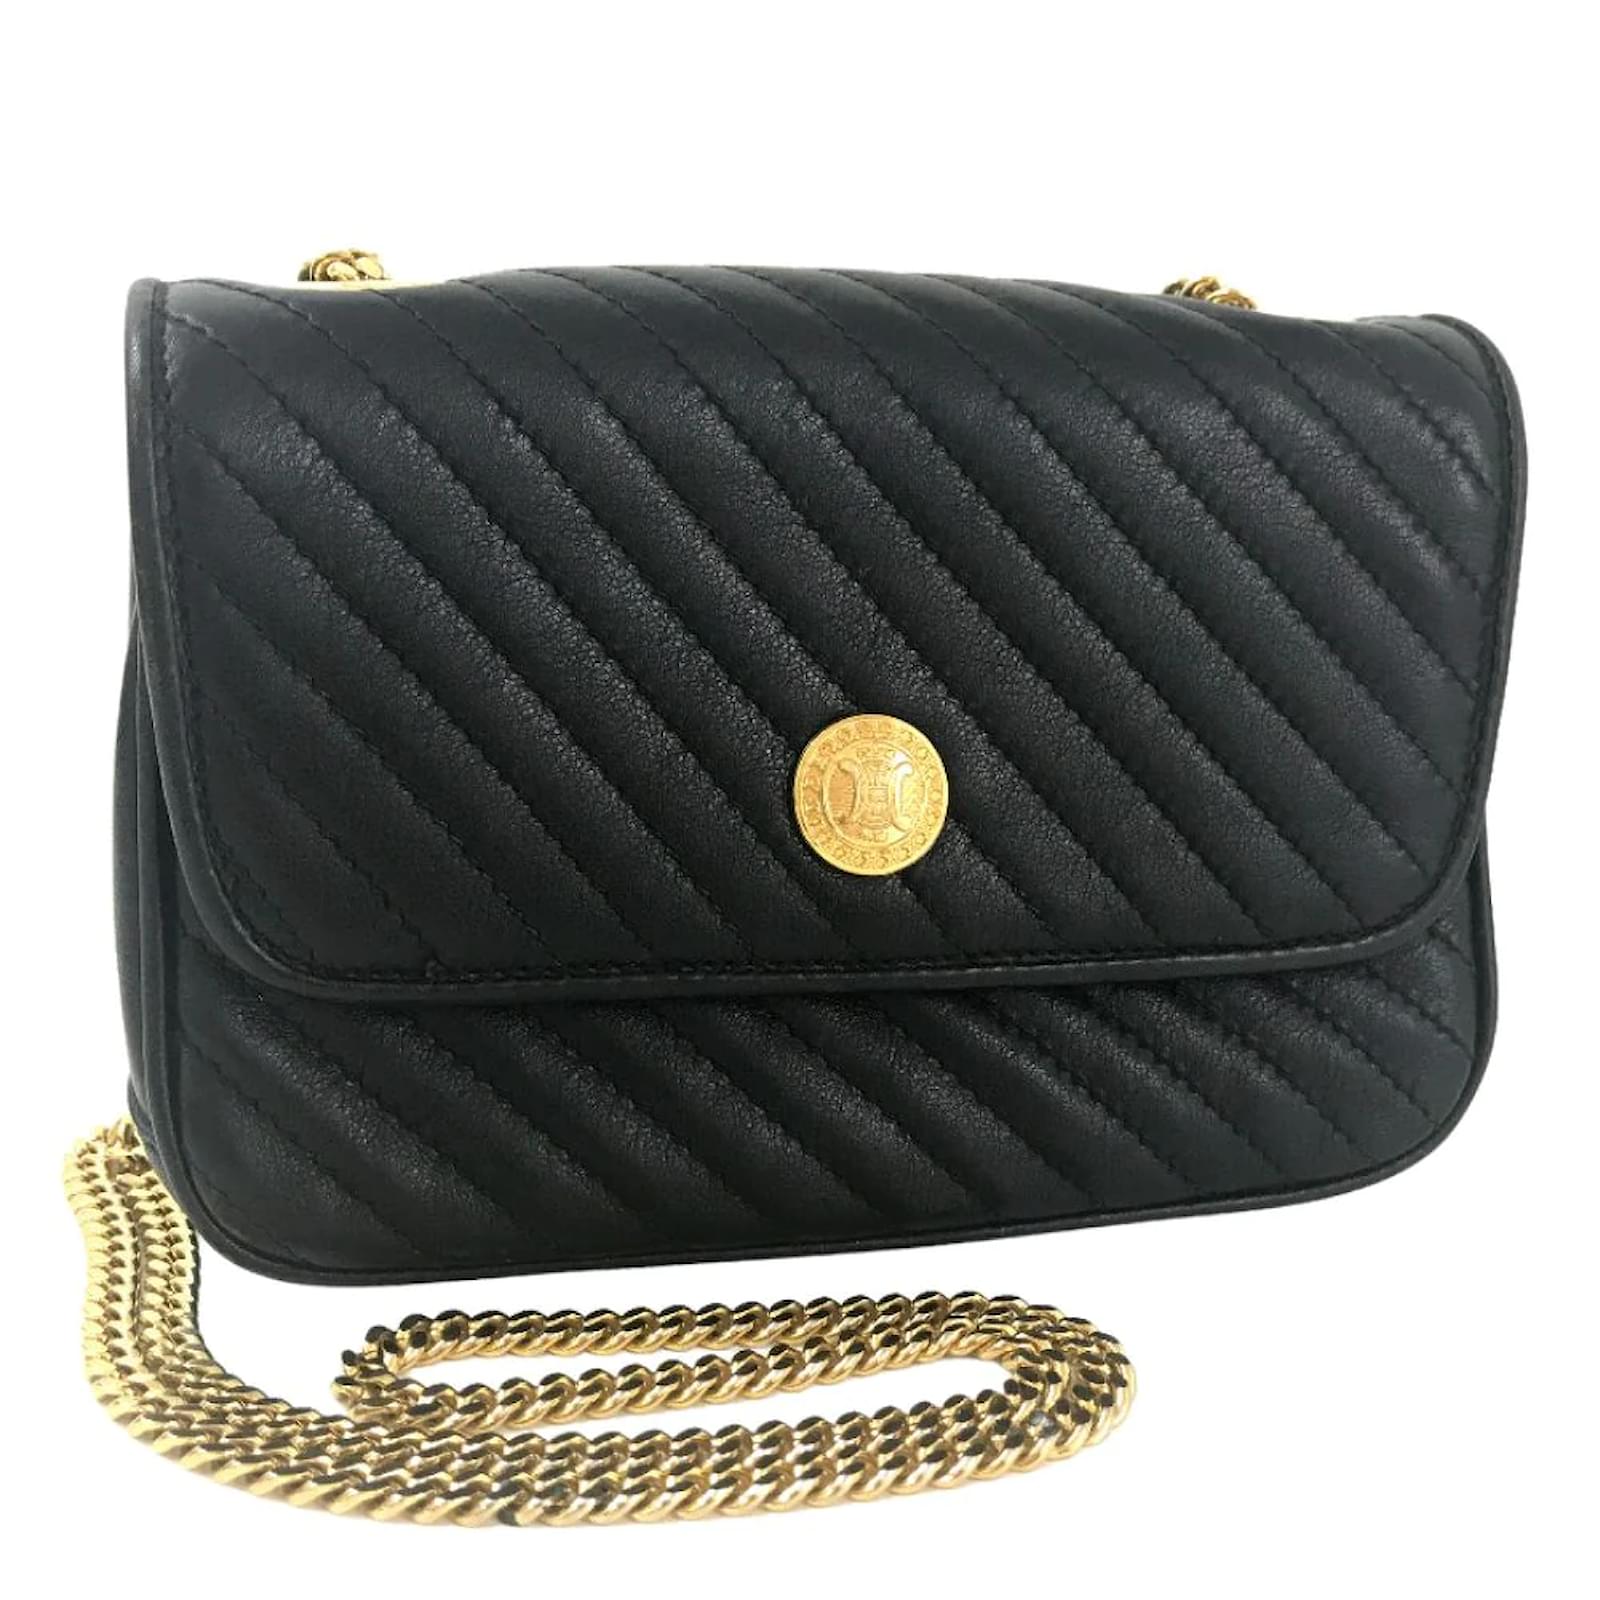 Triomphe chain leather crossbody bag Celine Black in Leather